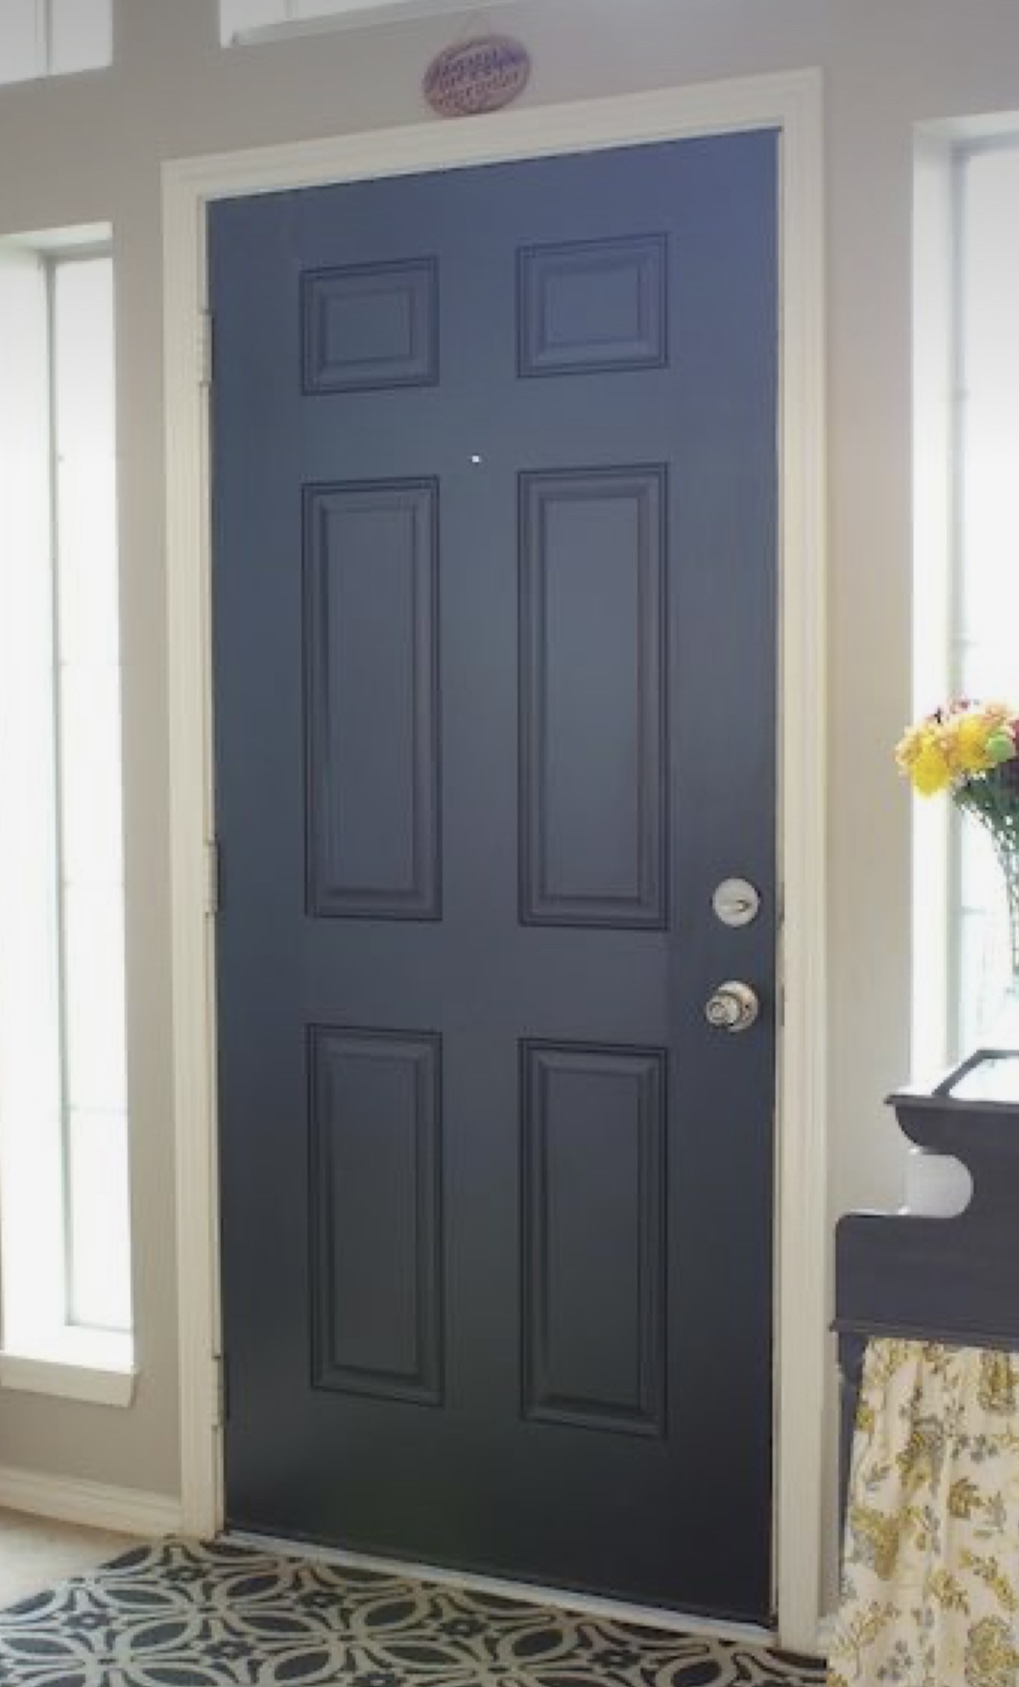 Here the trim doesn't match the door color